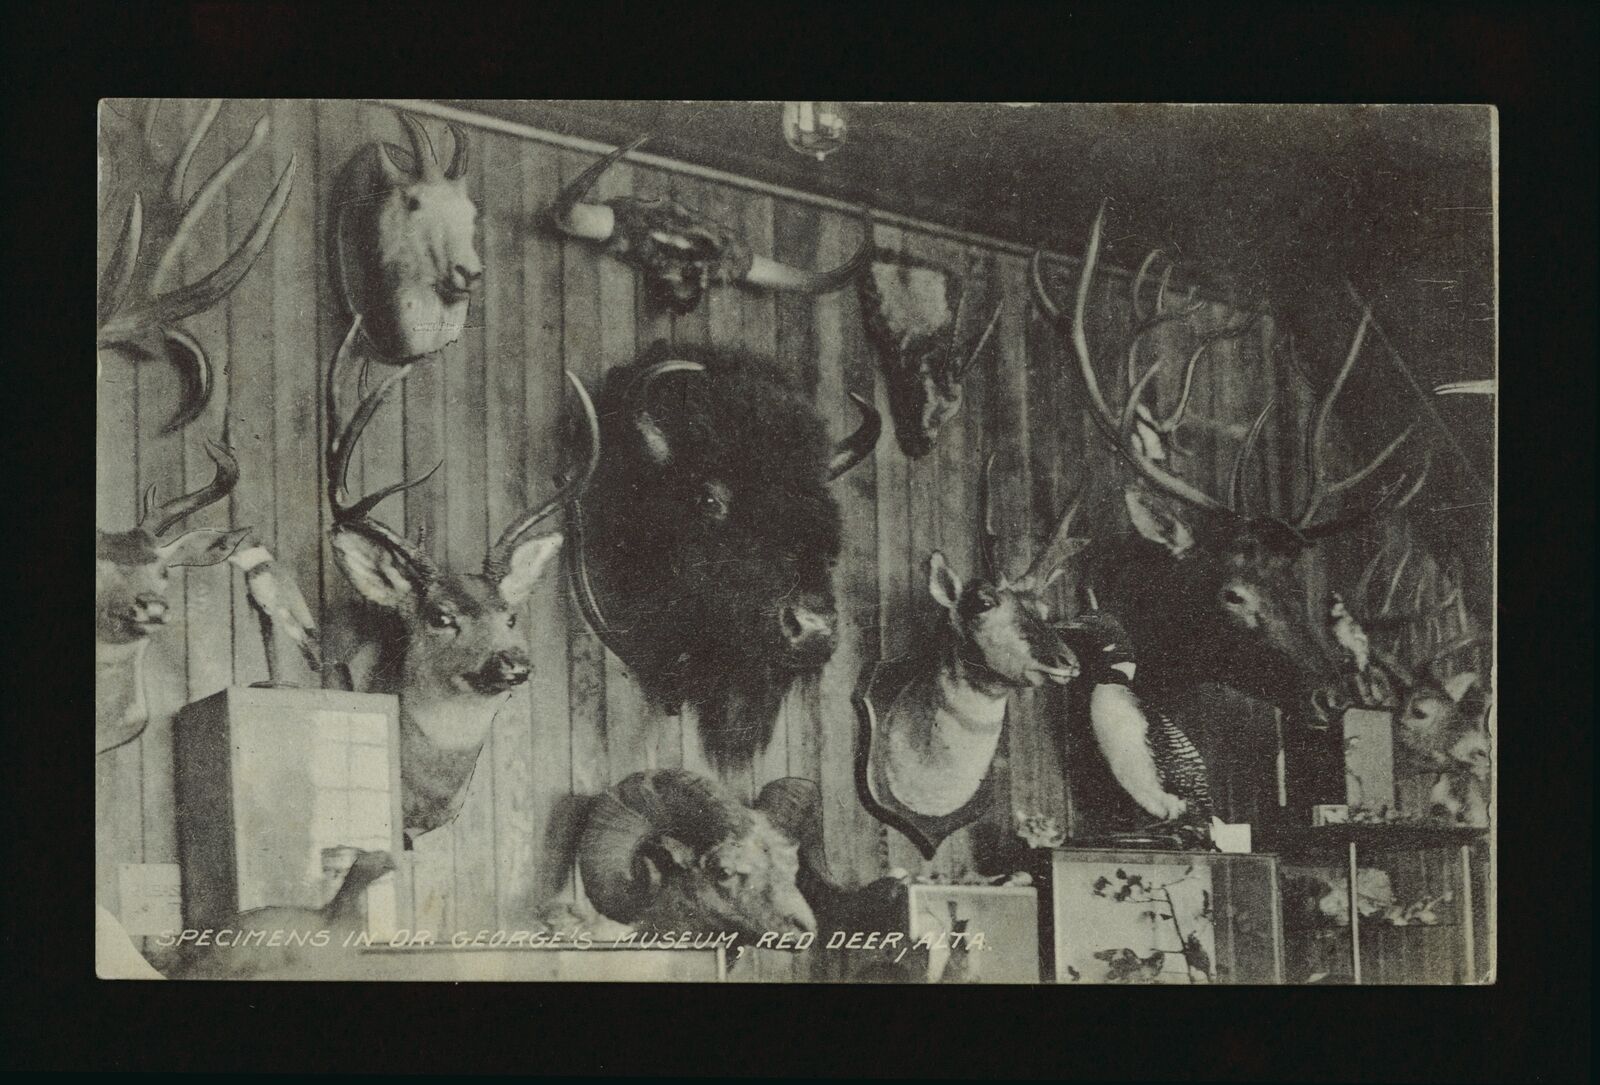 Specimens in Dr George\'s museum Red Deer Alberta, View of the Doct- Old Photo